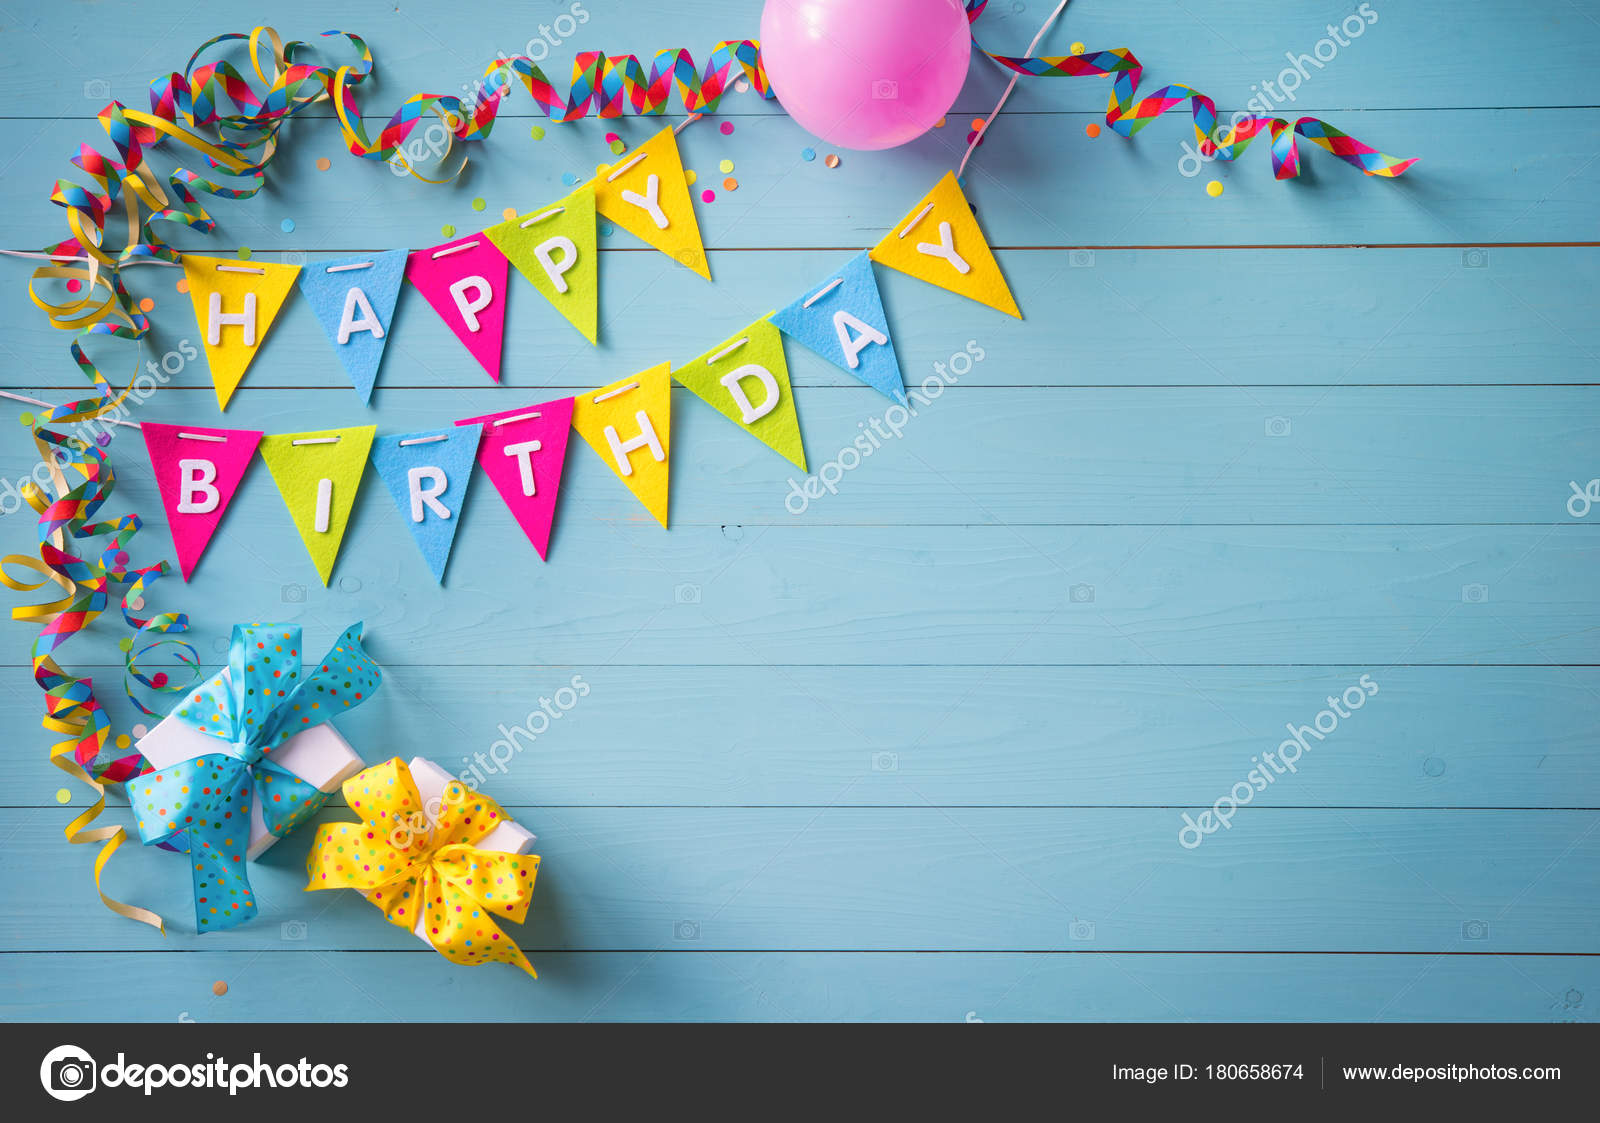 Happy birthday party background with text and colorful tools Stock Photo by  ©alexraths 180658674